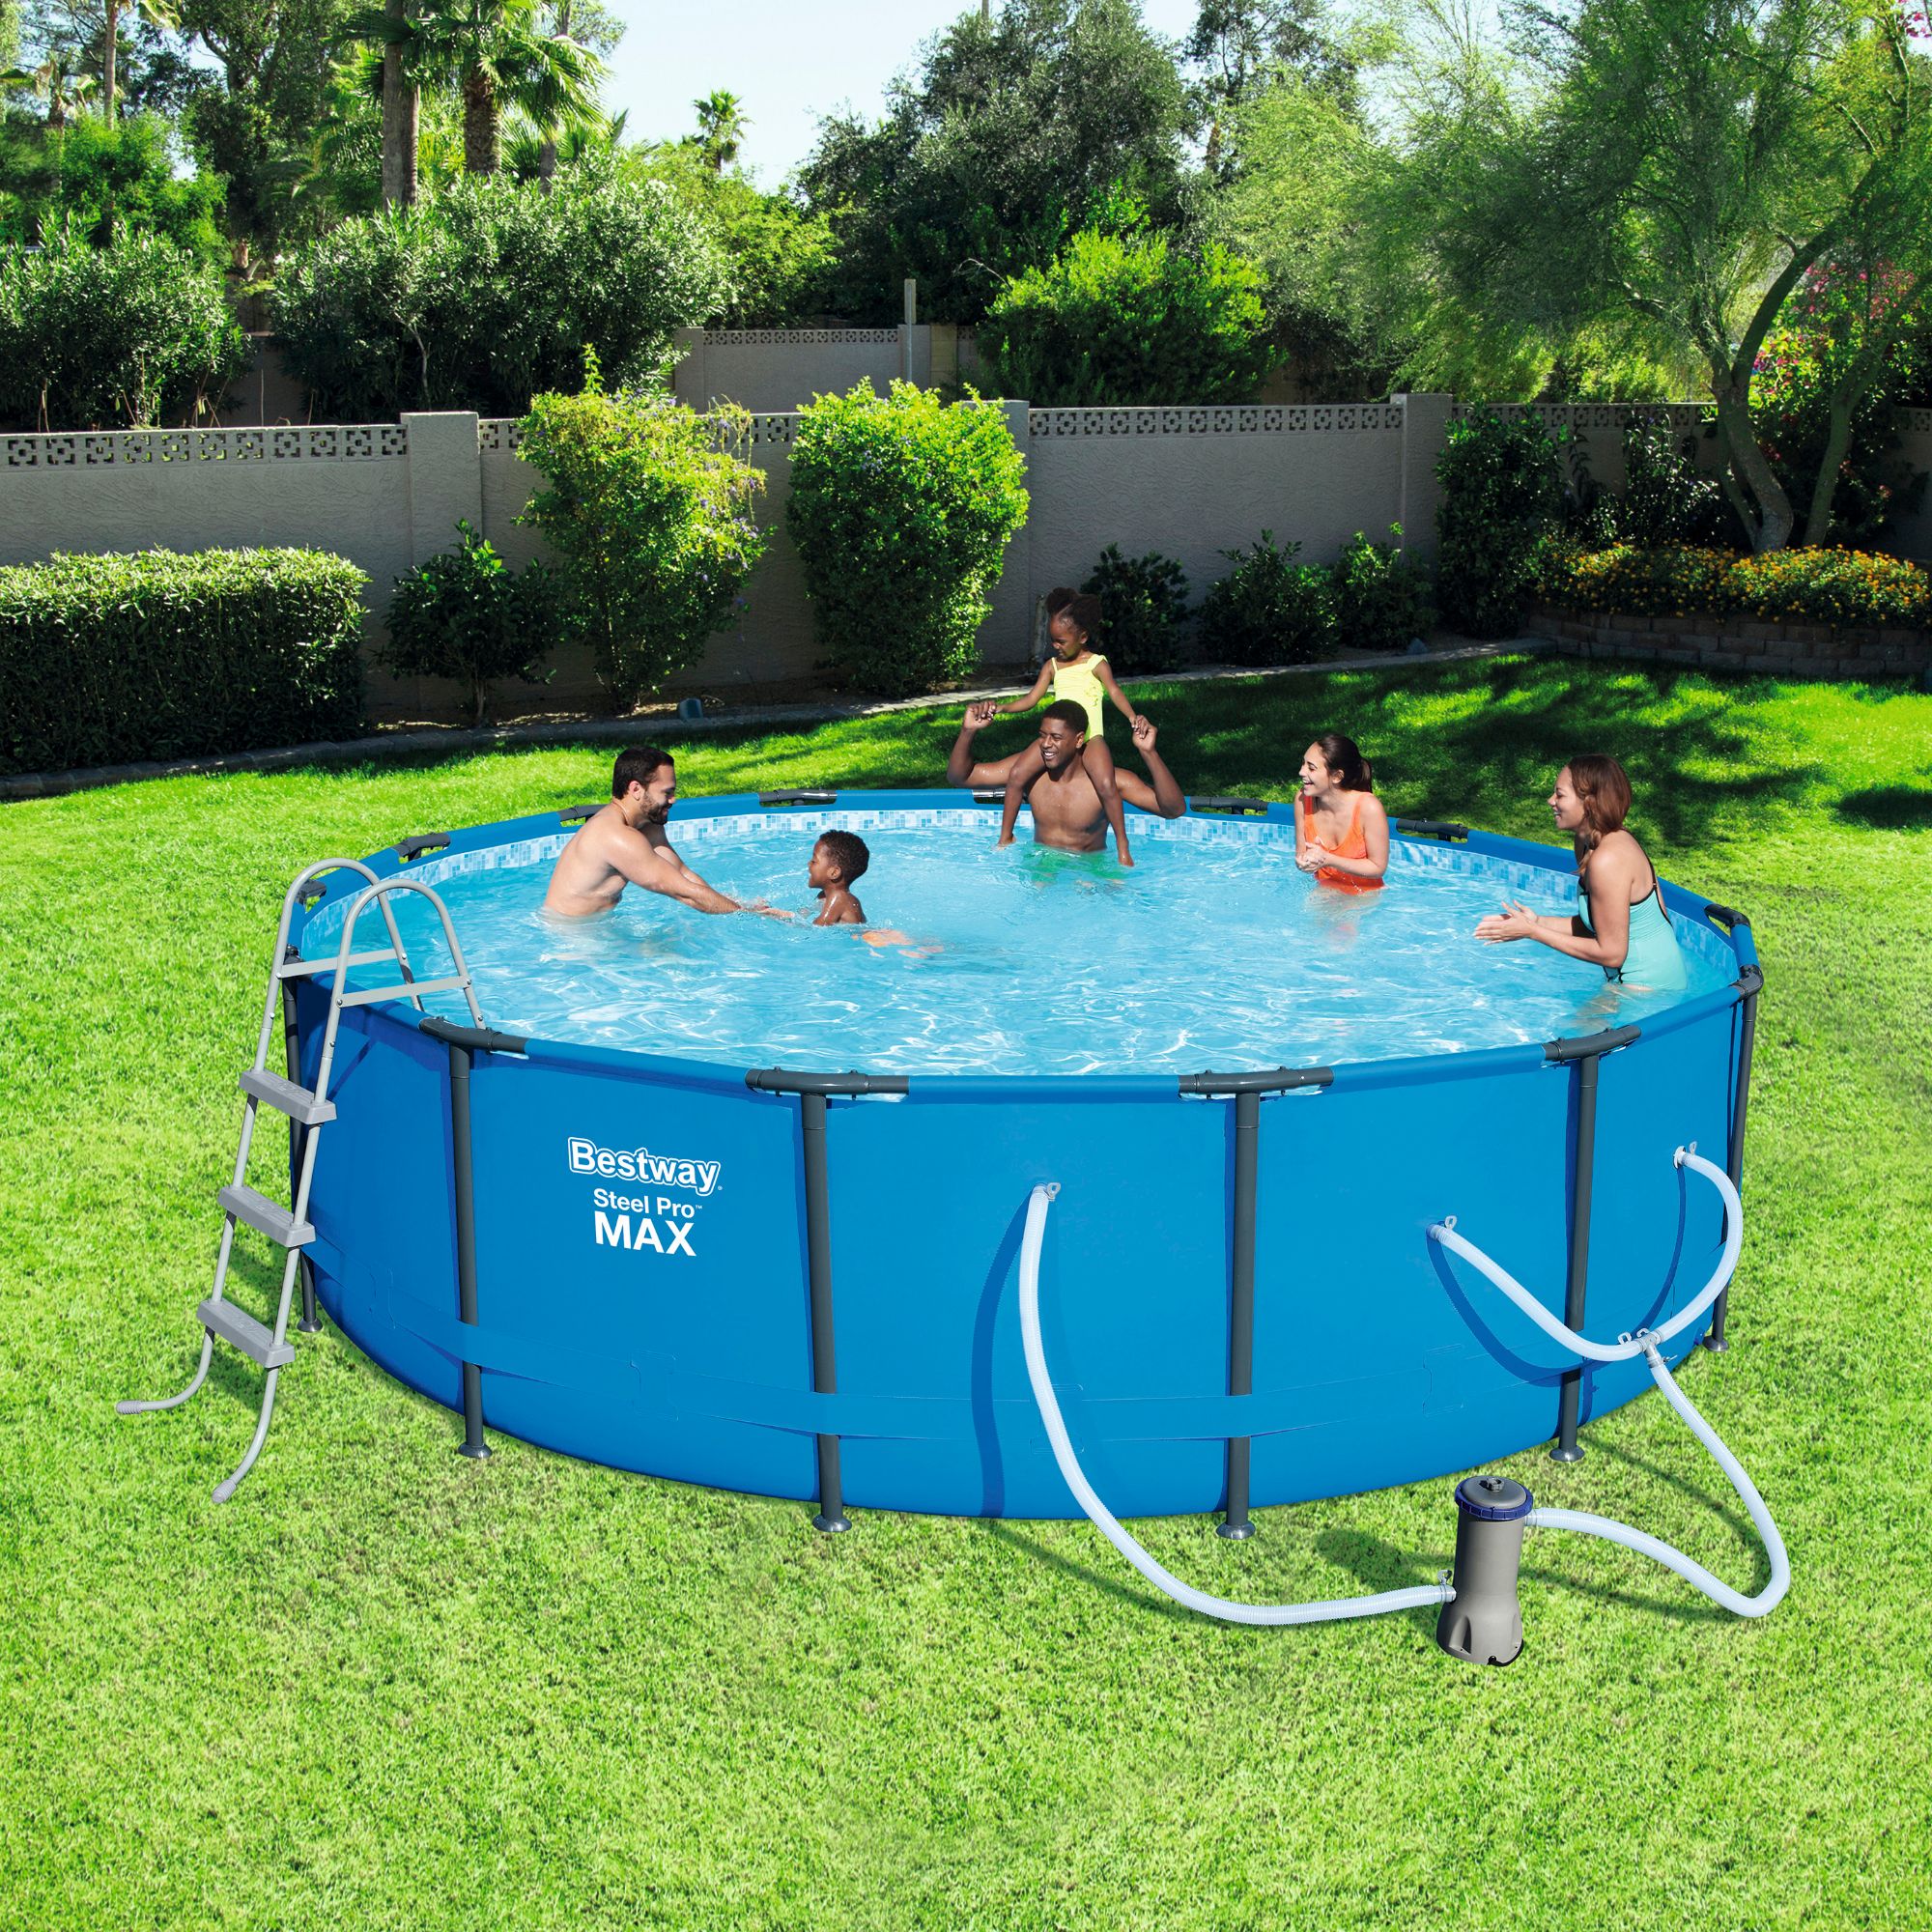 Bestway Steel Pro Max Swimming Pool Set with 1,000 GPH Filter Pump, 15' x 42" - image 2 of 2